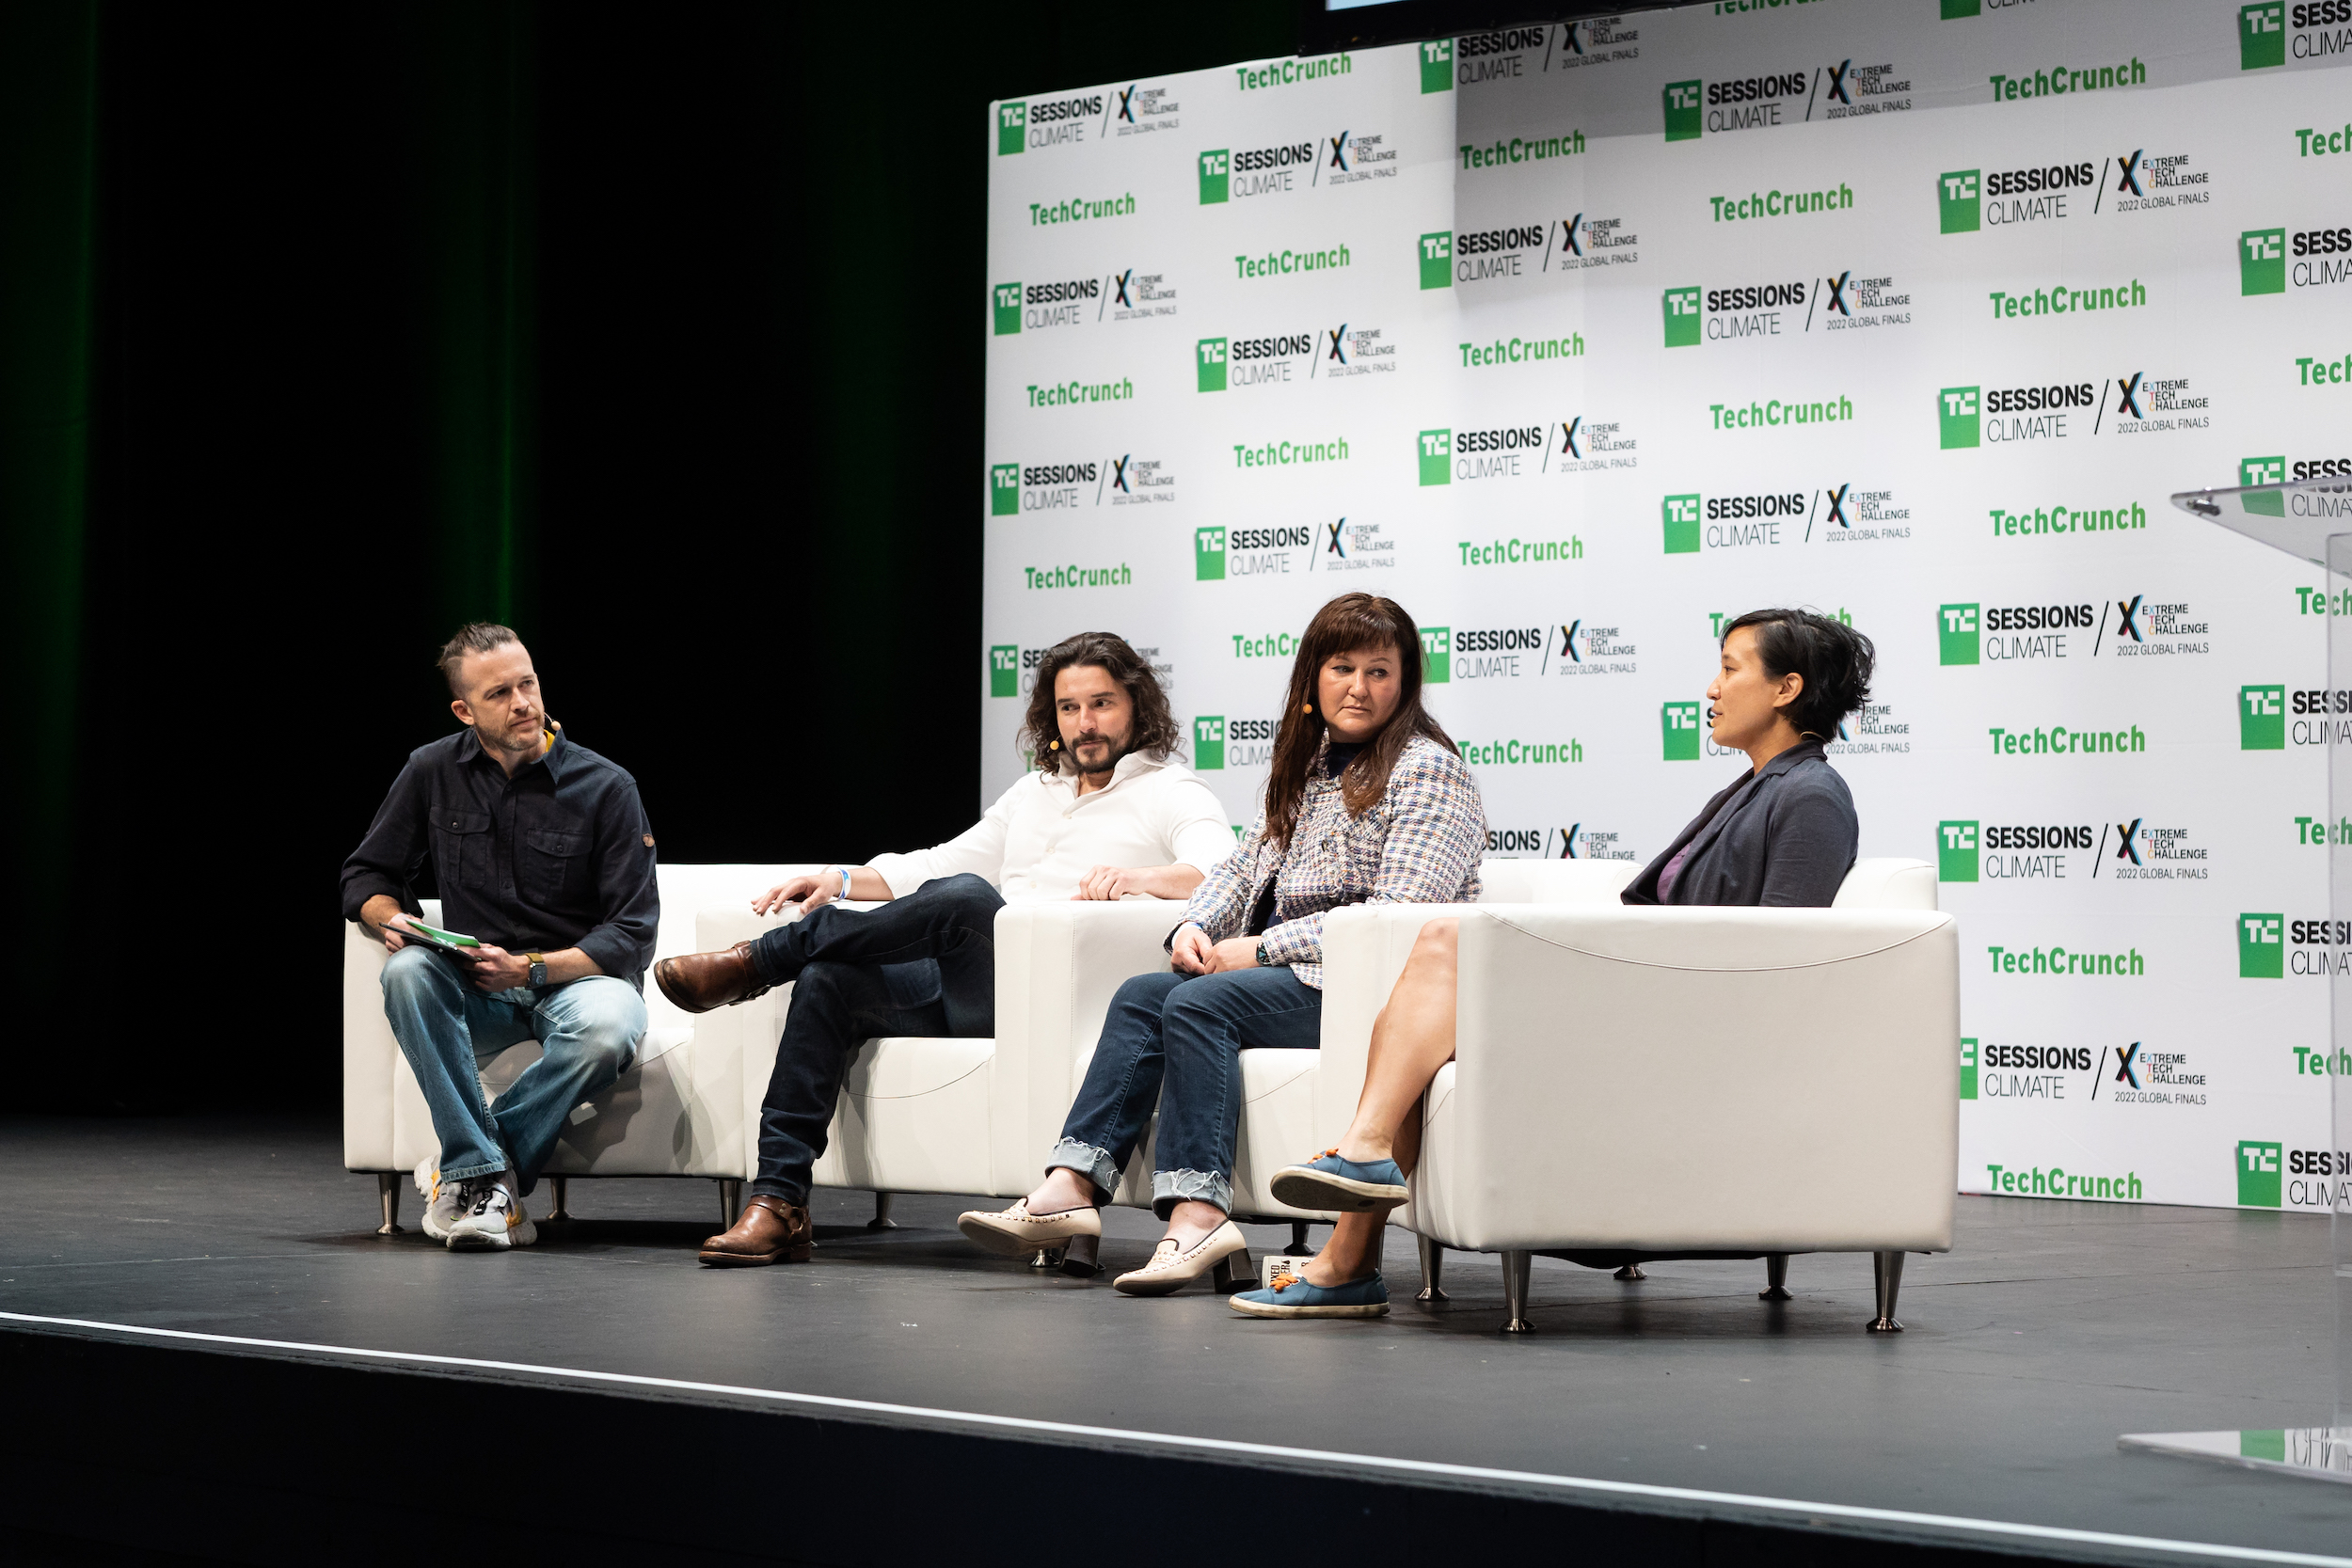 Tim De Chant interviews Christian Garcia, Kiersten Stead, and Pae Wu at TC Sessions: Climate 2022